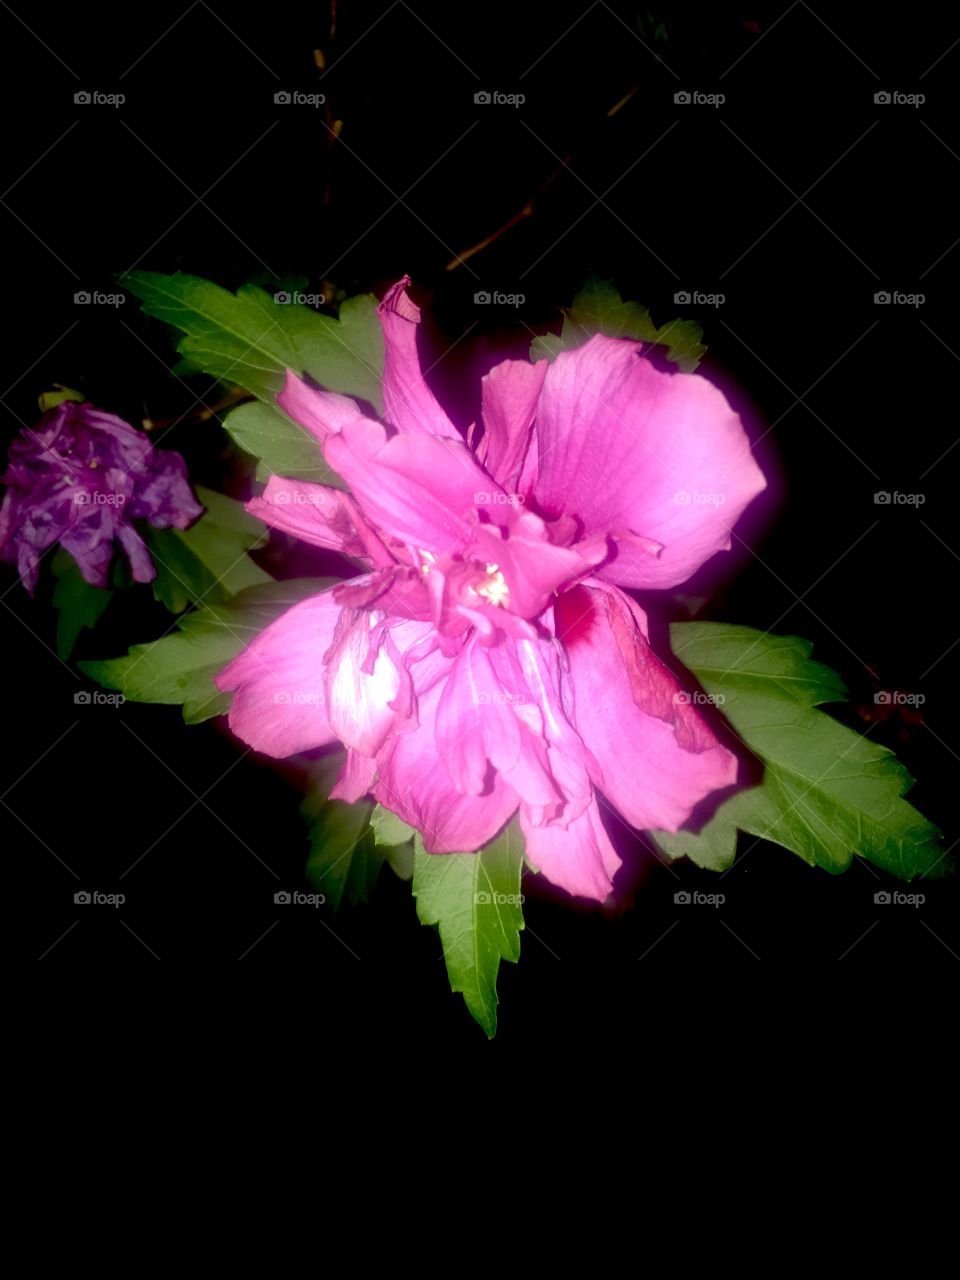 Nighttime photo of a flower 